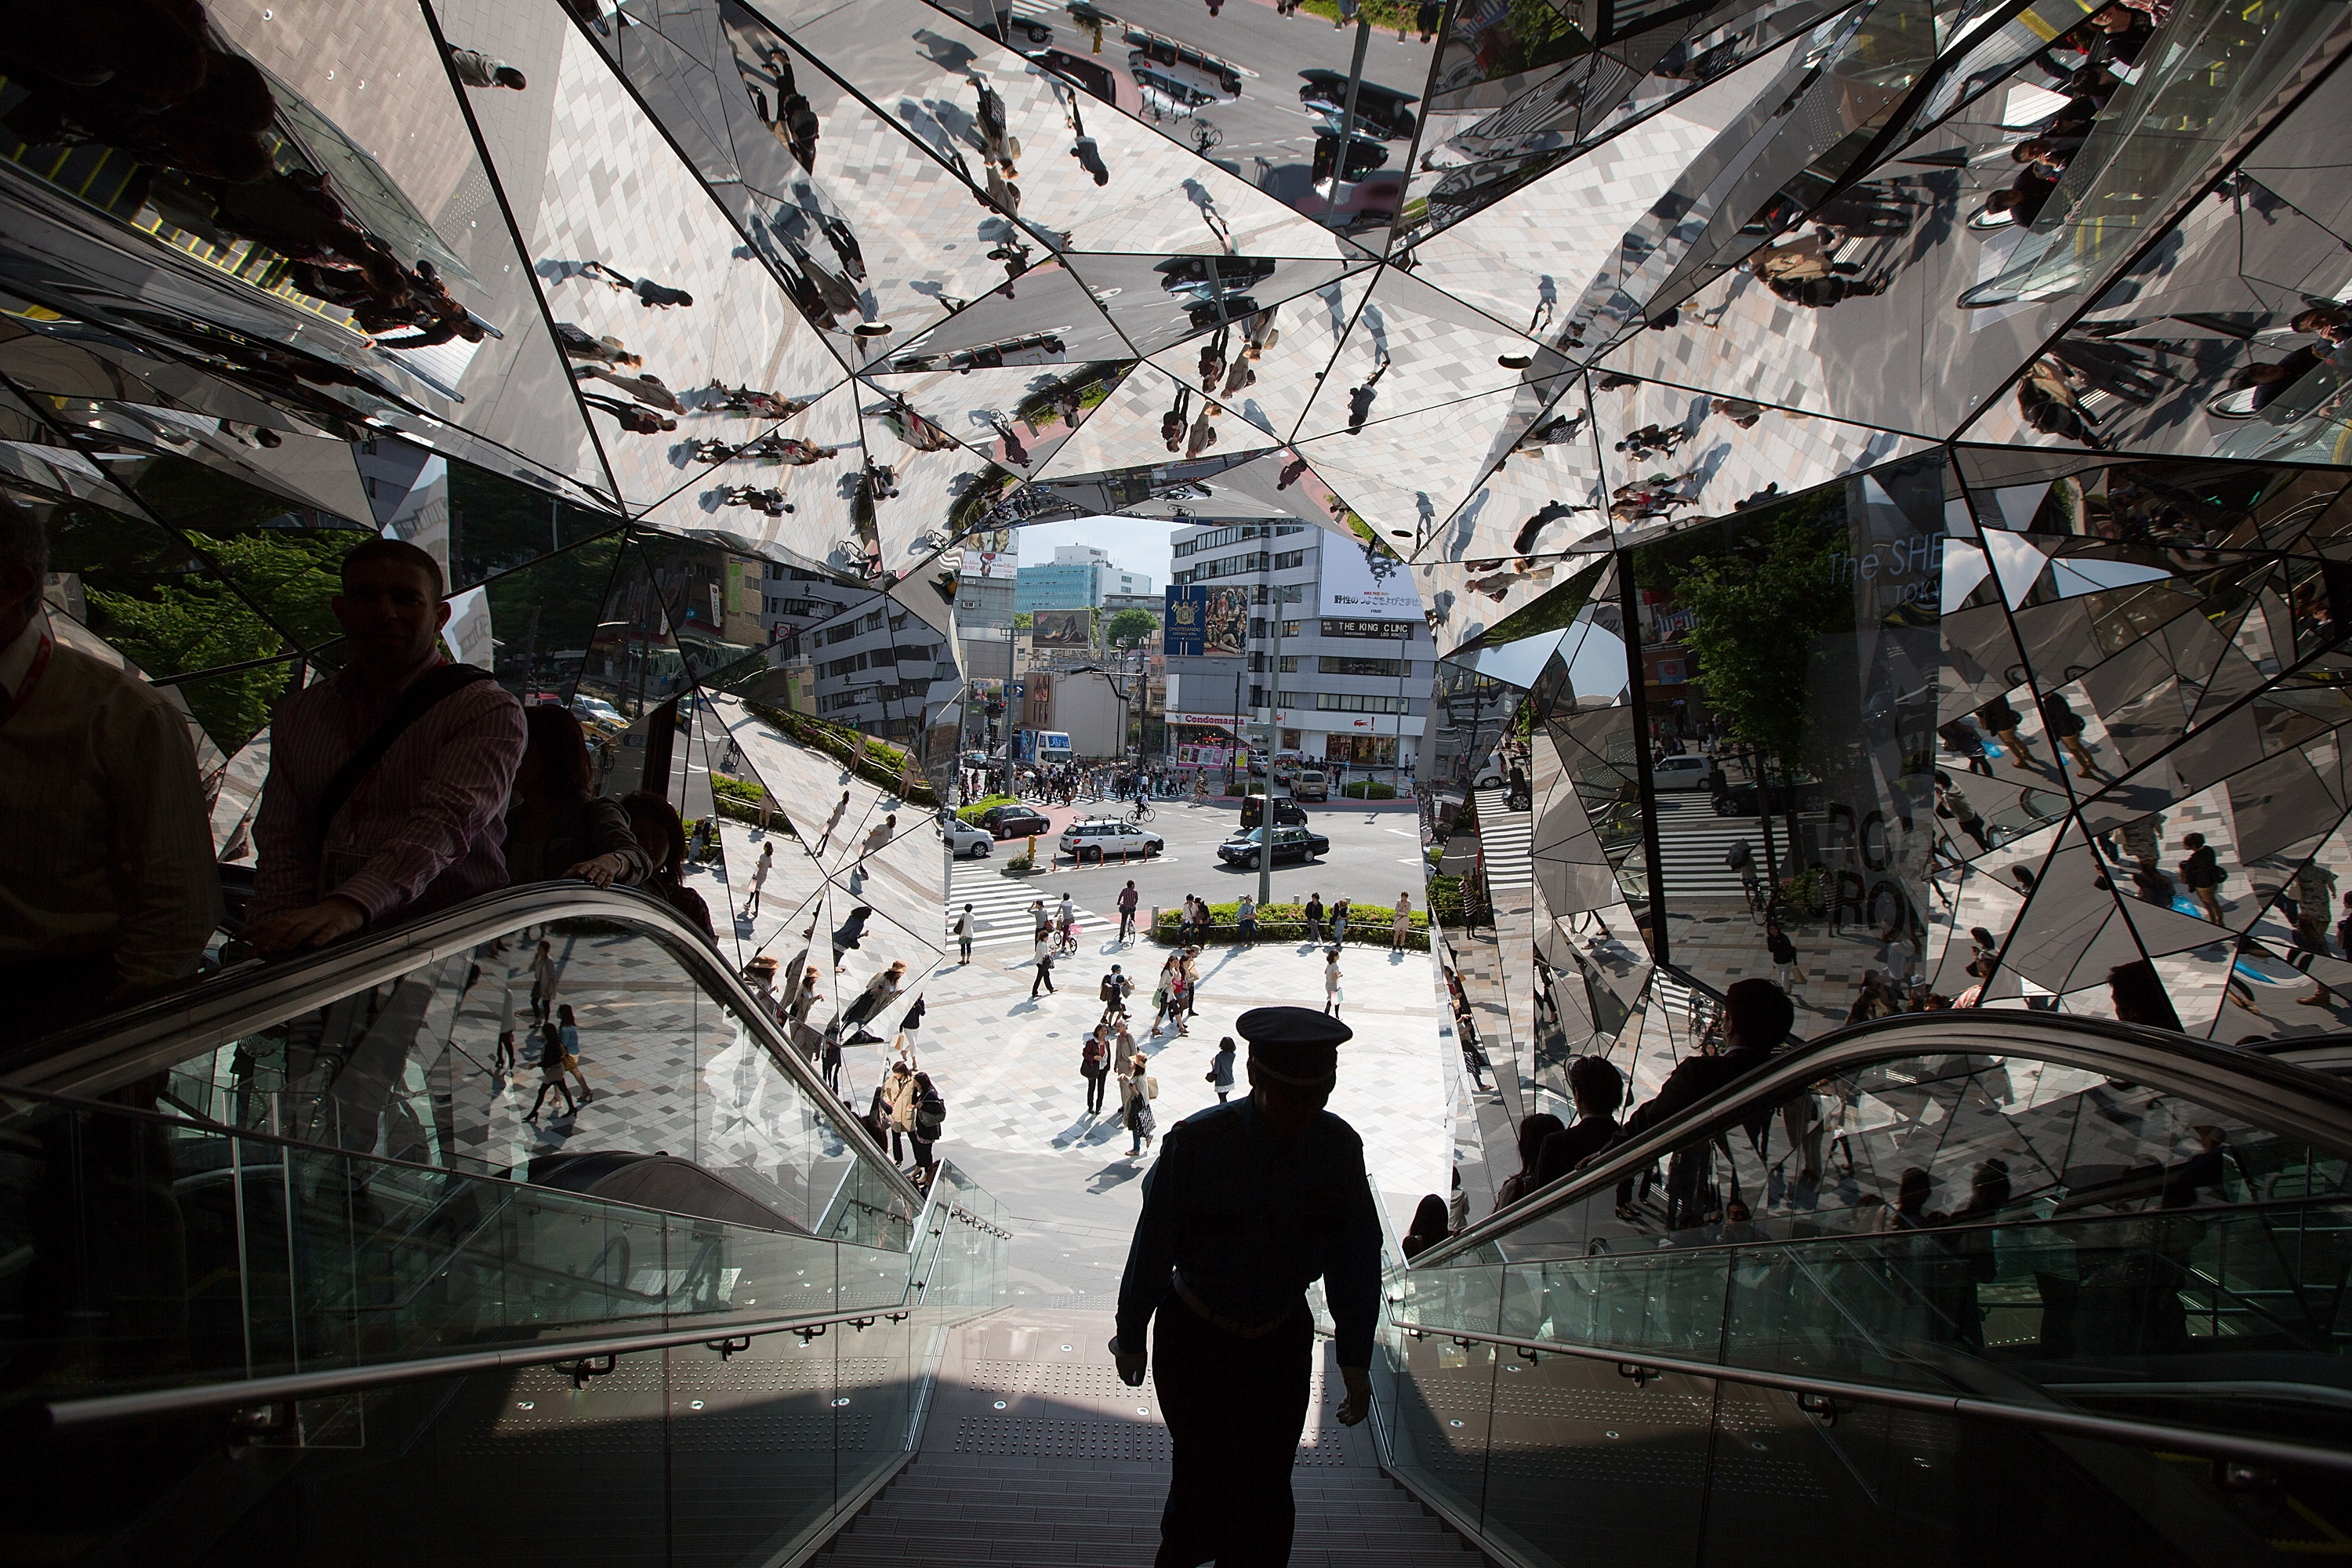 Japanese shoppers and a security guard are reflected in the entrance to the 'Tokyu Plaza Omotesando Harajuku' shopping complex in Tokyo on May 11, 2012. (Jeremy Sutton-Hibbert—Getty Images)